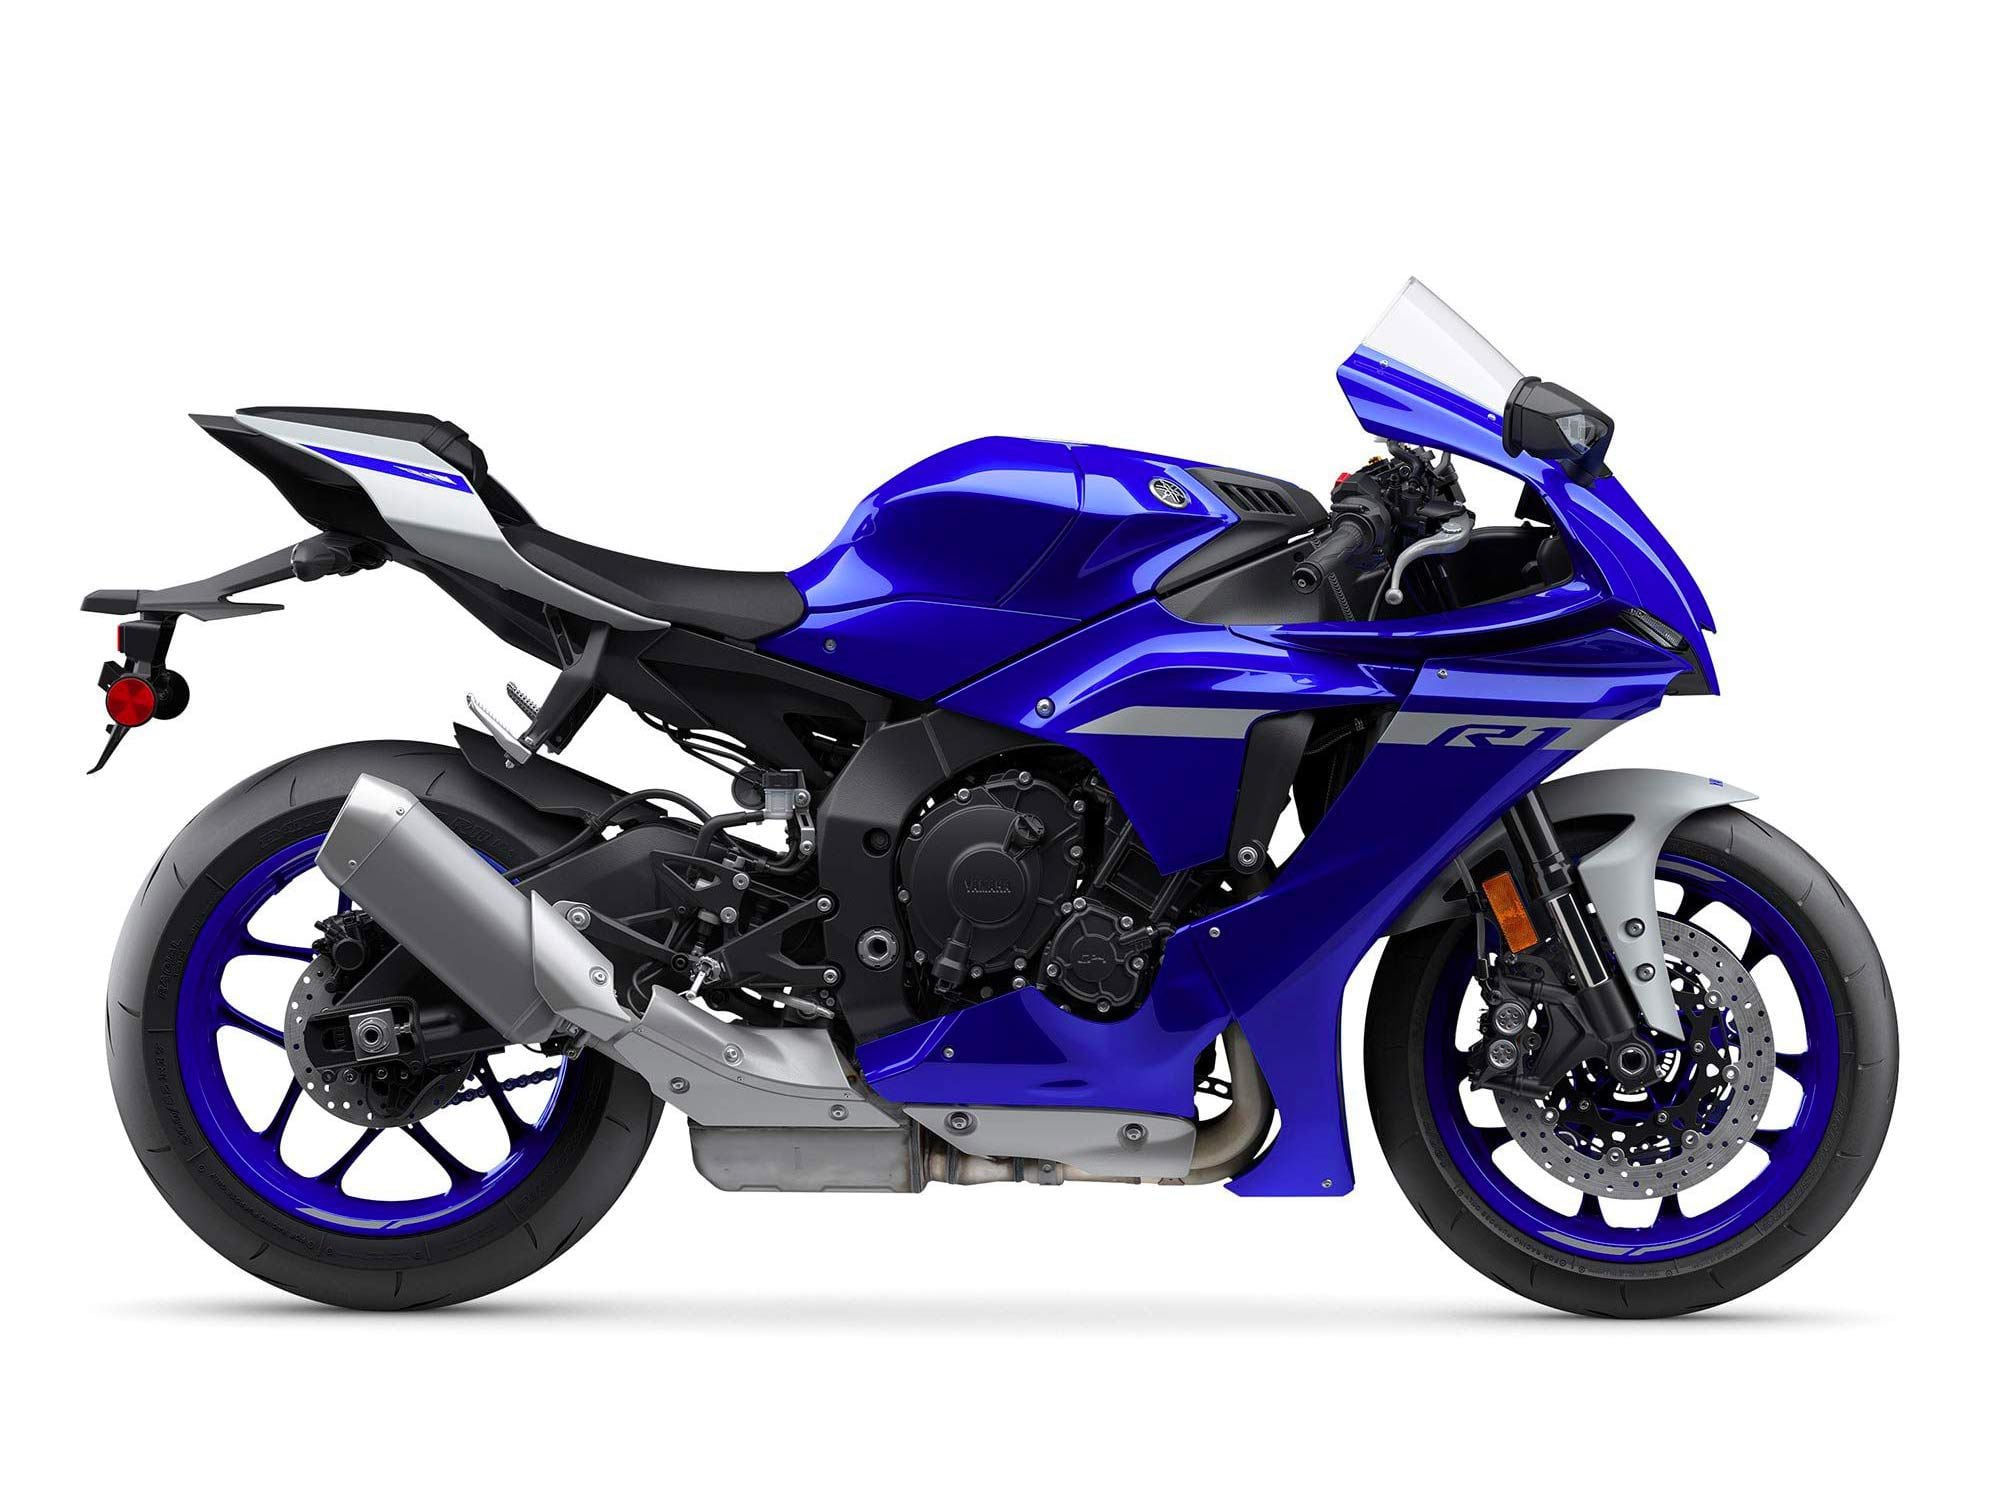 2021 Yamaha YZF-R1/M Buyer's Guide: Specs, Photos, Price